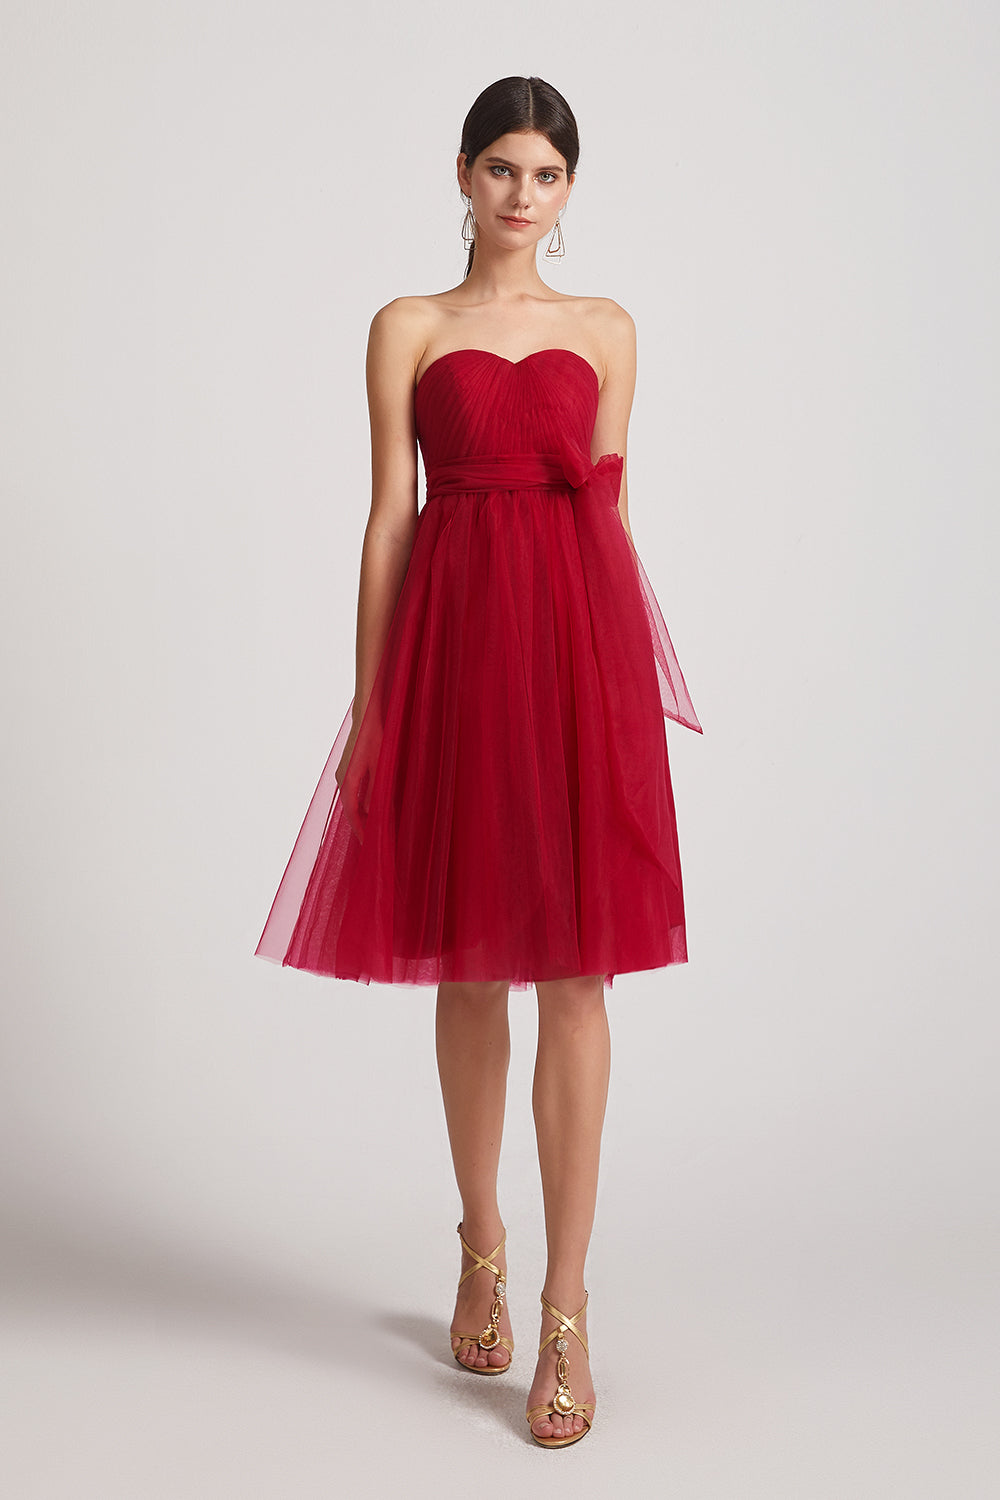 red pleated short bridesmaids dresses